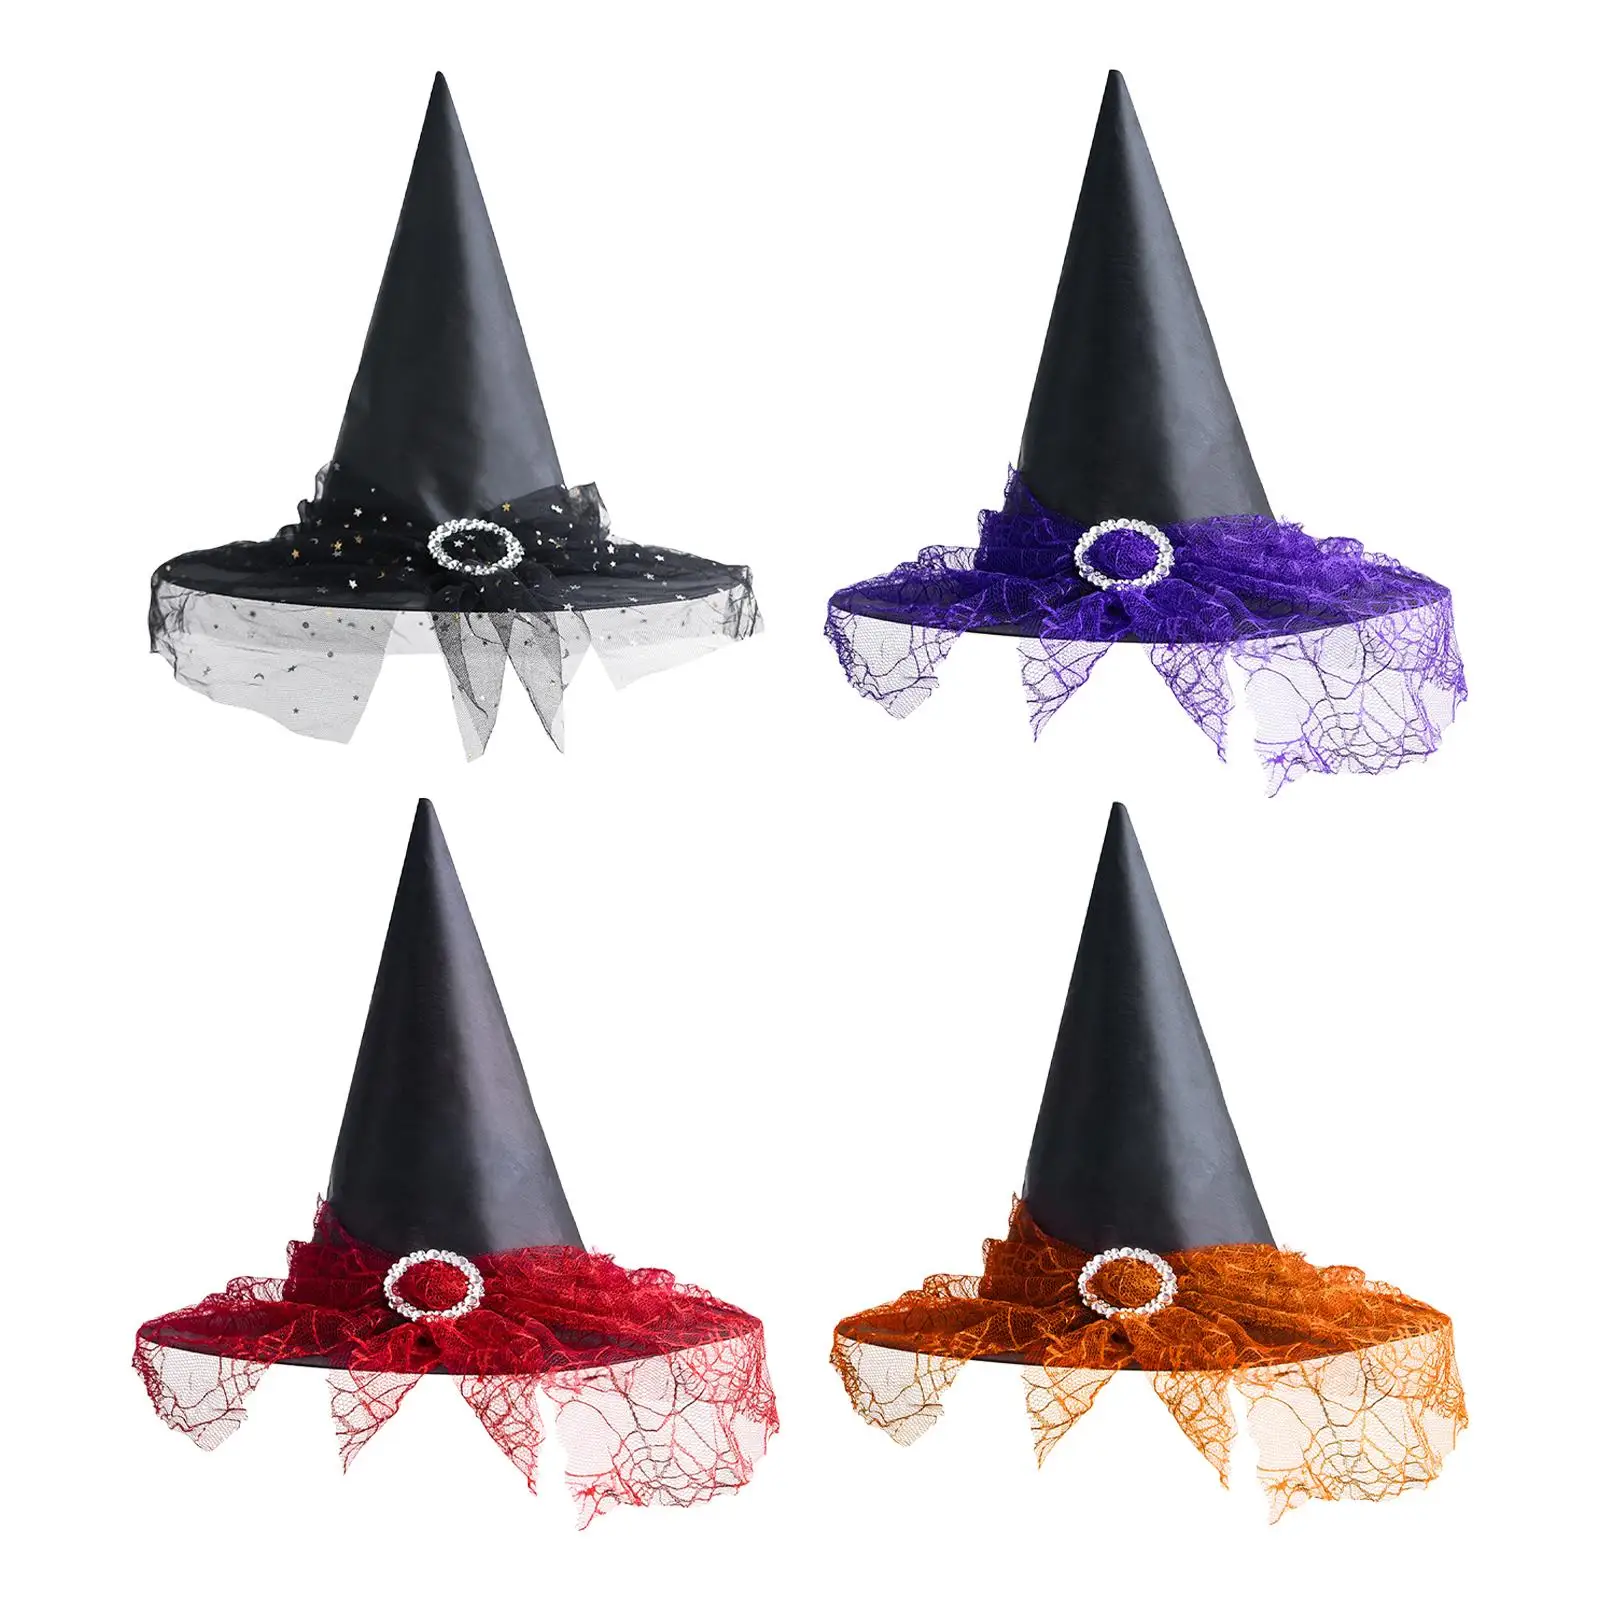 

Halloween Witch Hat Wizard Costume Accessory Pointed Top Adult Hat for Halloween Party Masquerade Carnivals Fancy Dress Cosplay